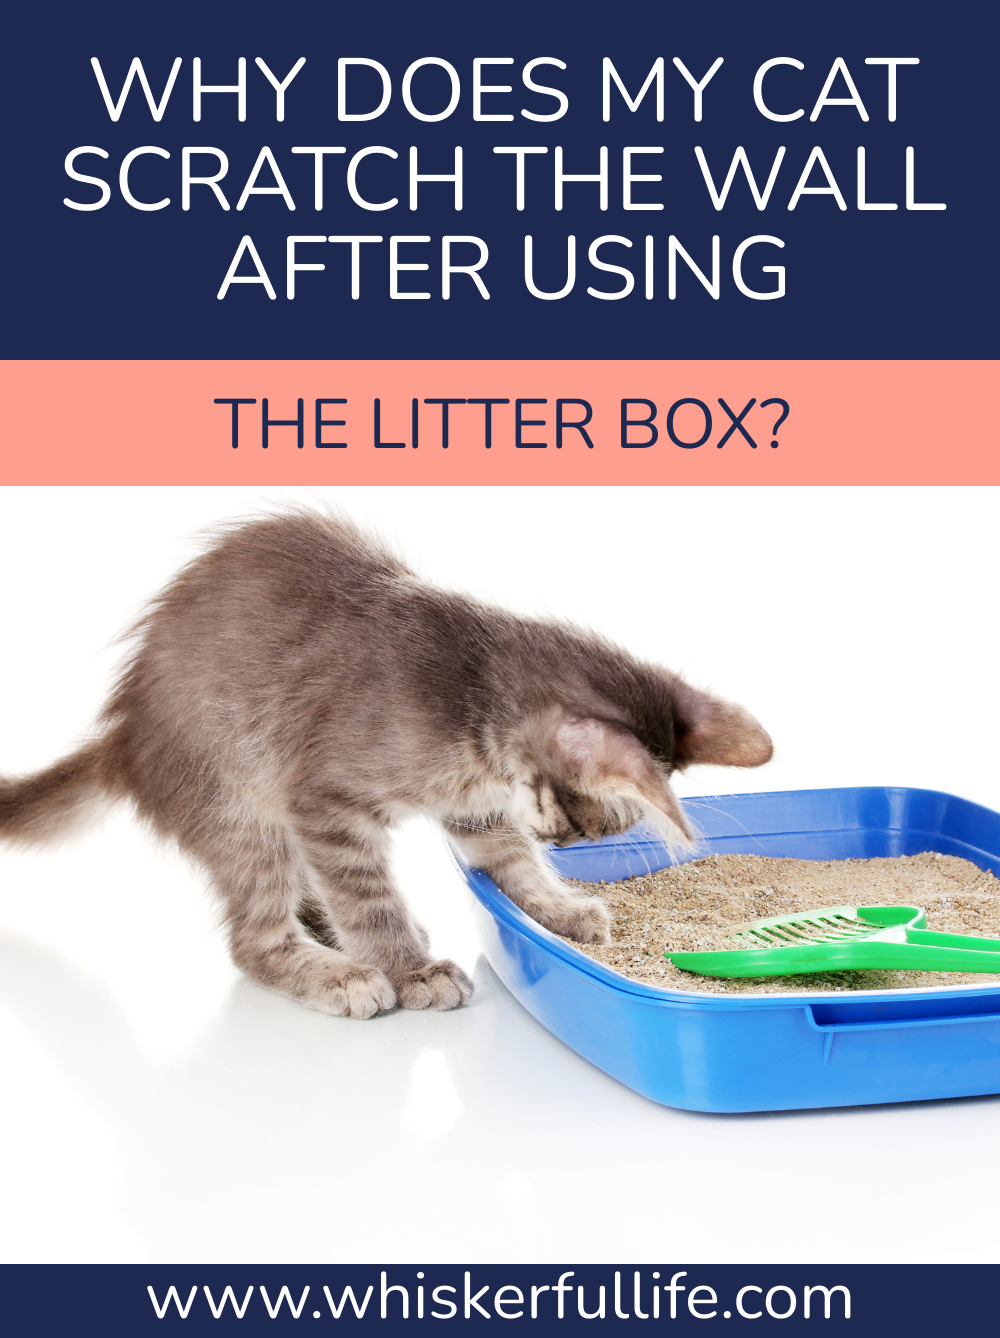 Why Does My Cat Scratch the Wall After Using the Litter Box?